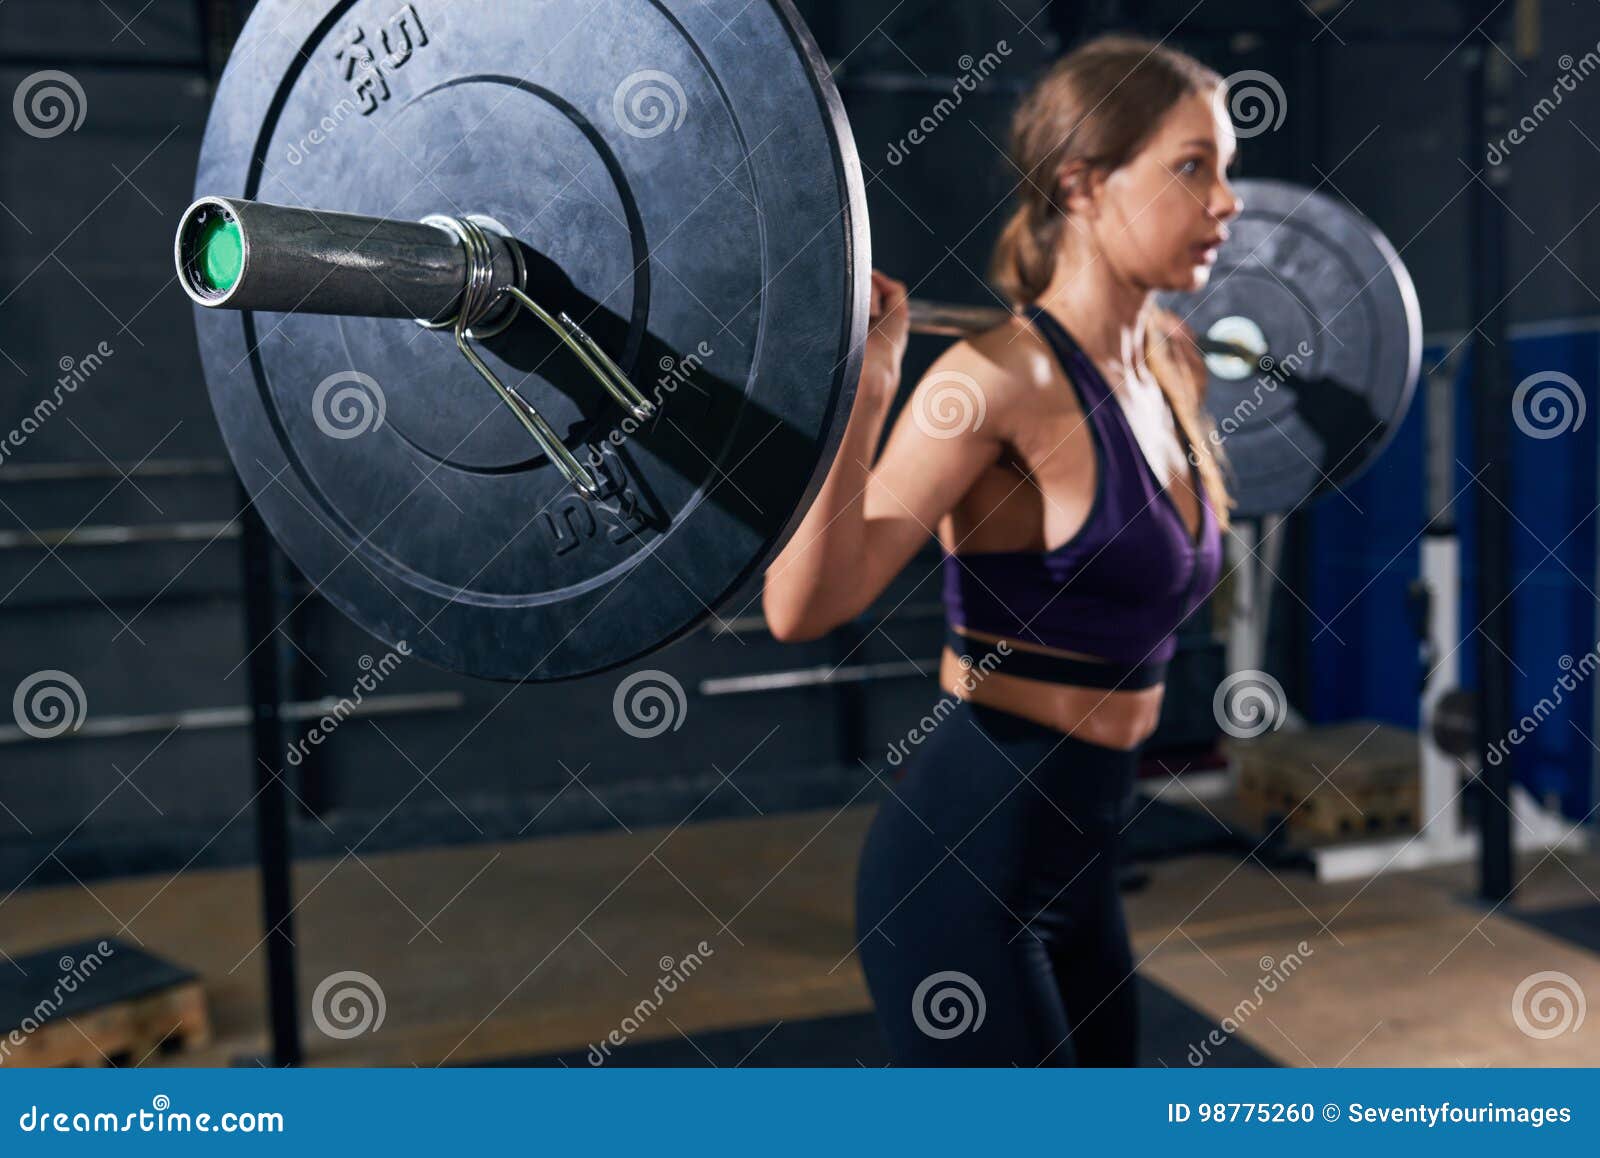 Beautiful Woman Holding Heavy Barbell in Gym Stock Photo - Image of ...